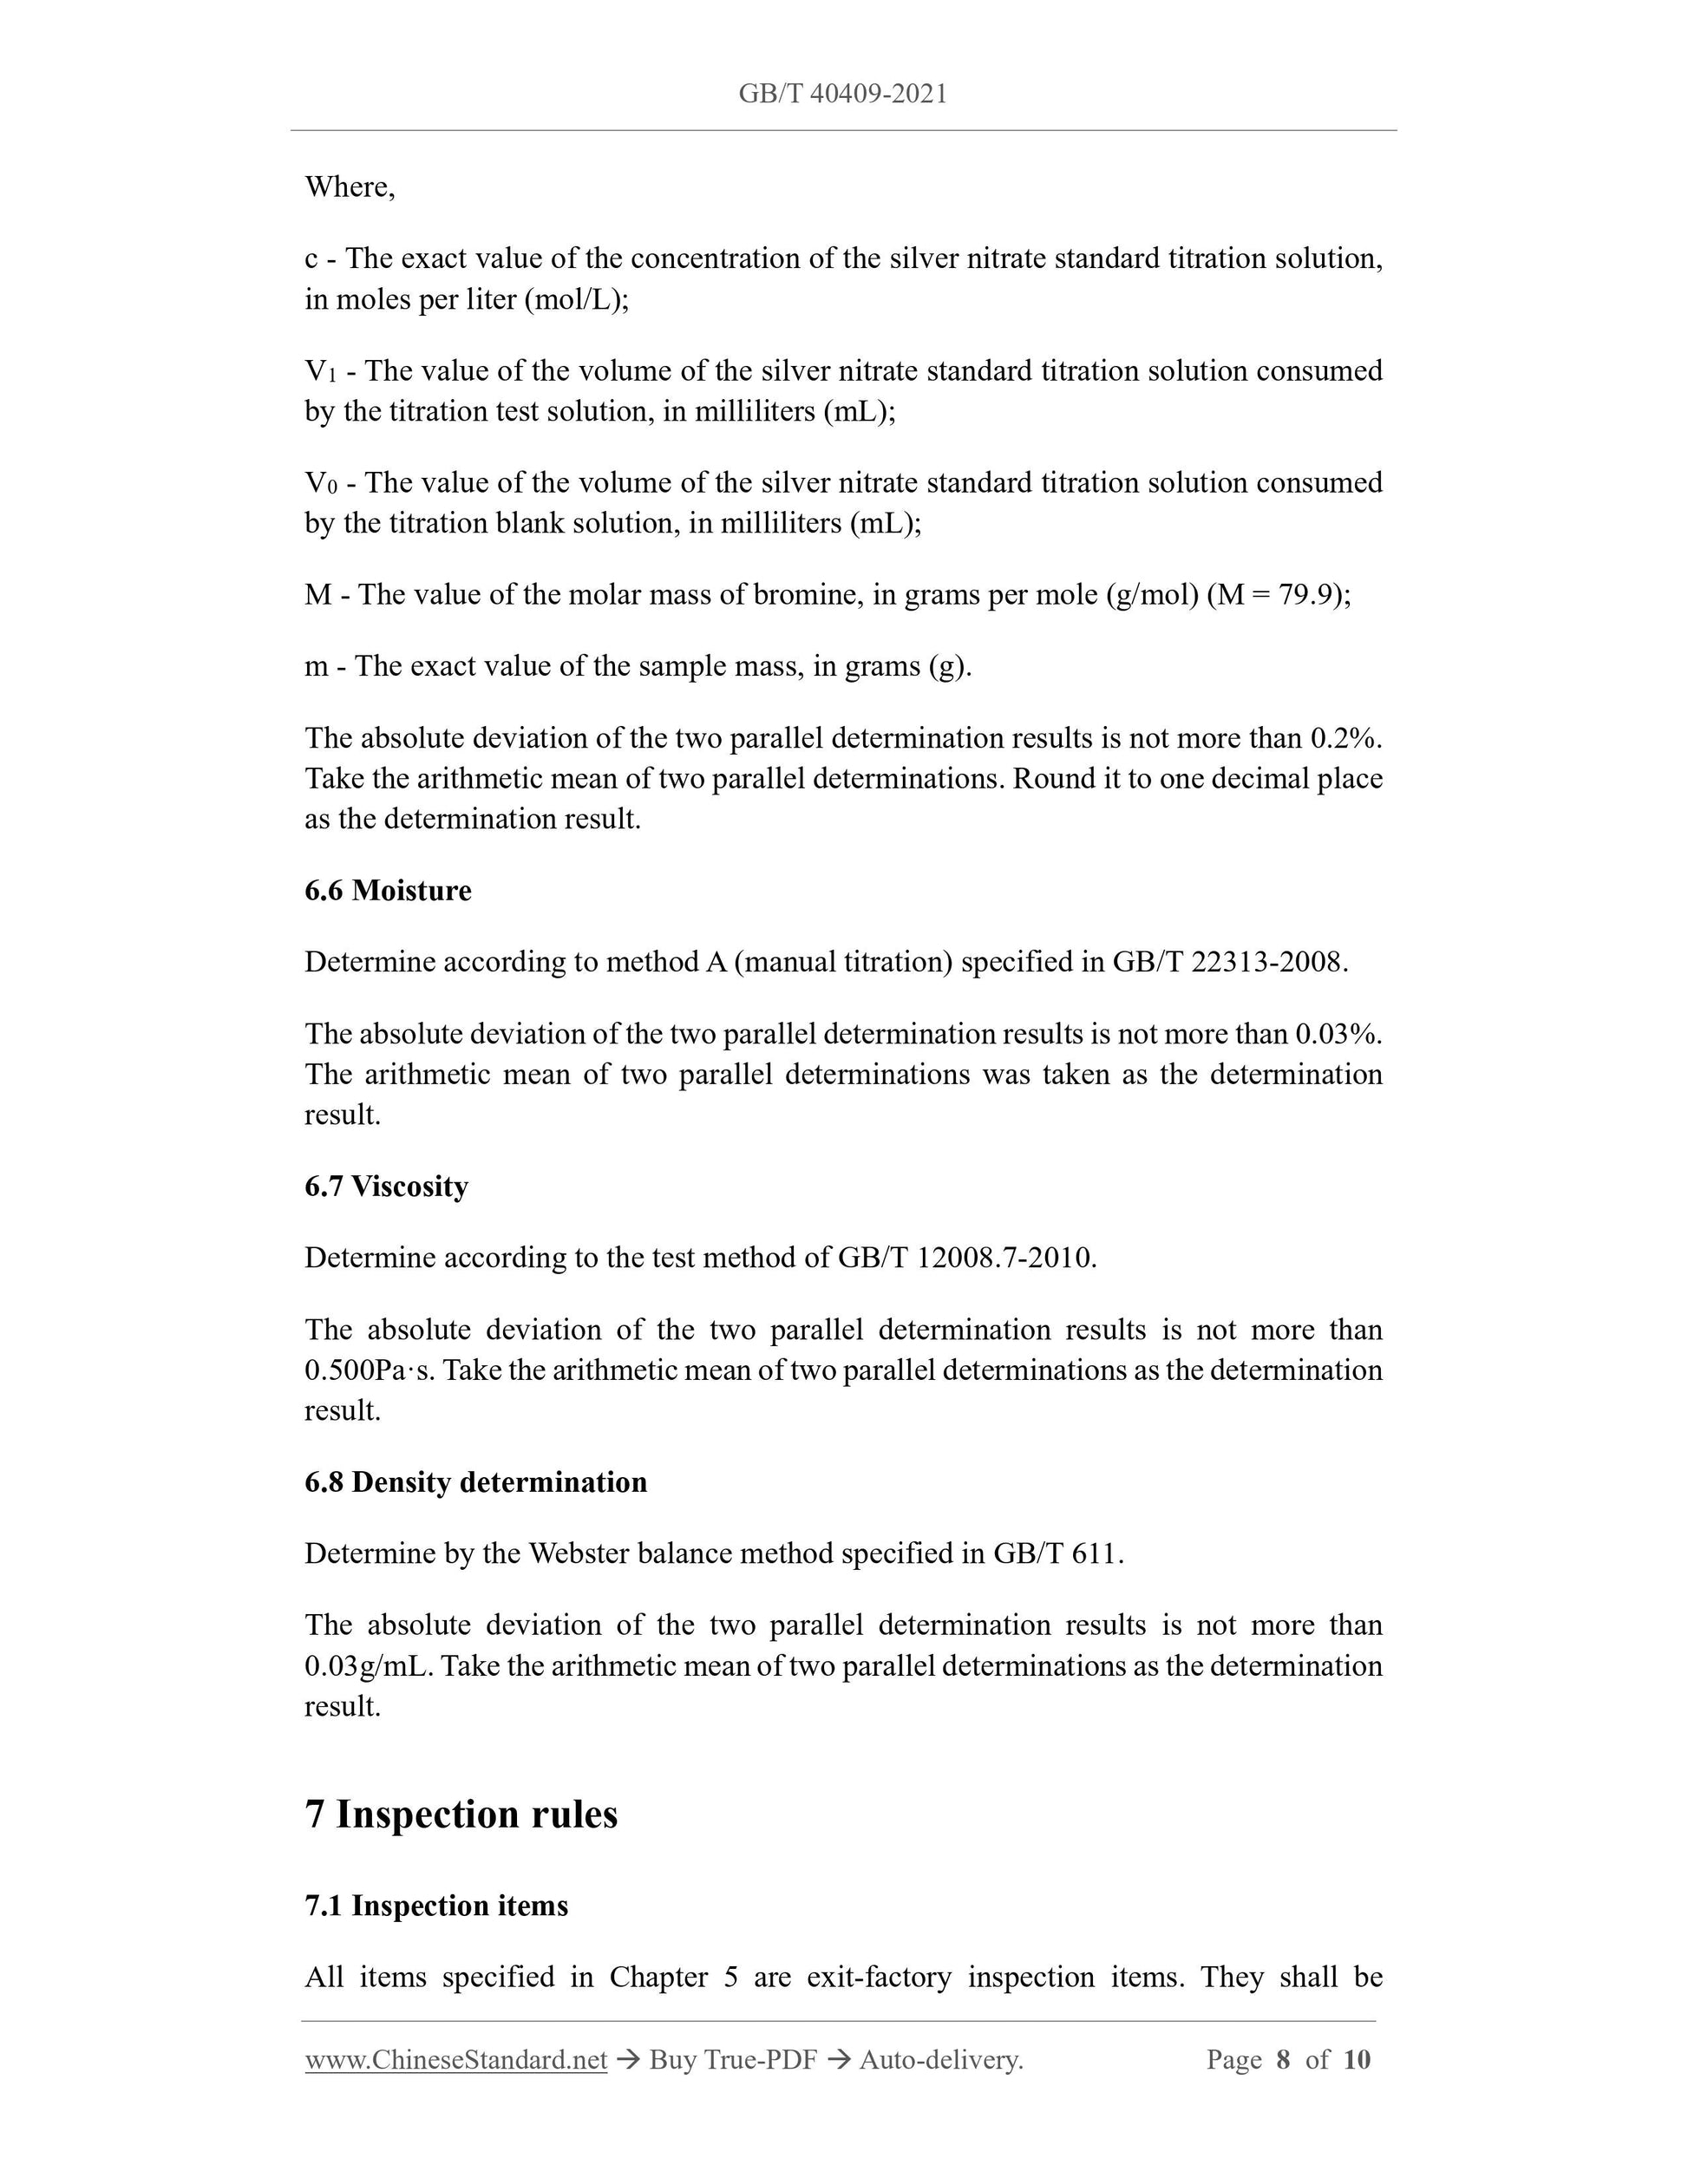 GB/T 40409-2021 Page 5